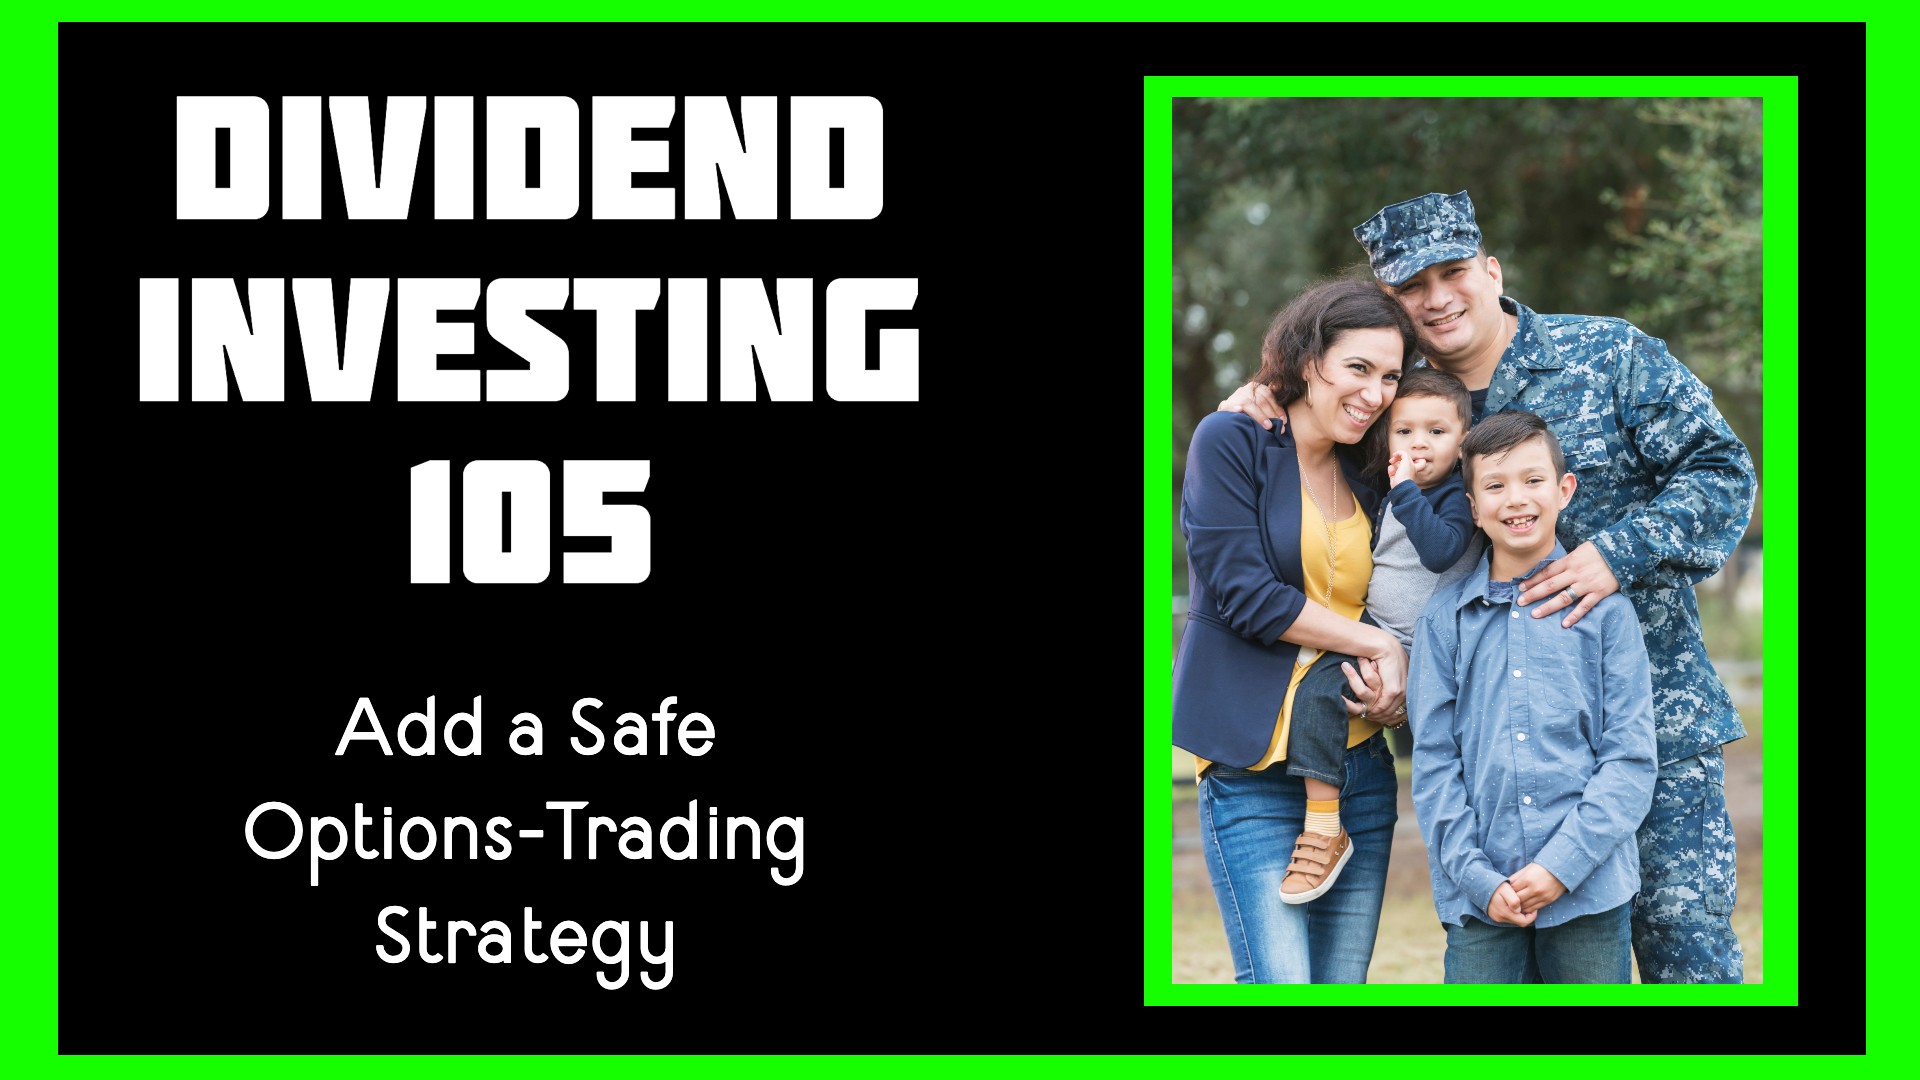 Dividend Investing 105 Options Trading